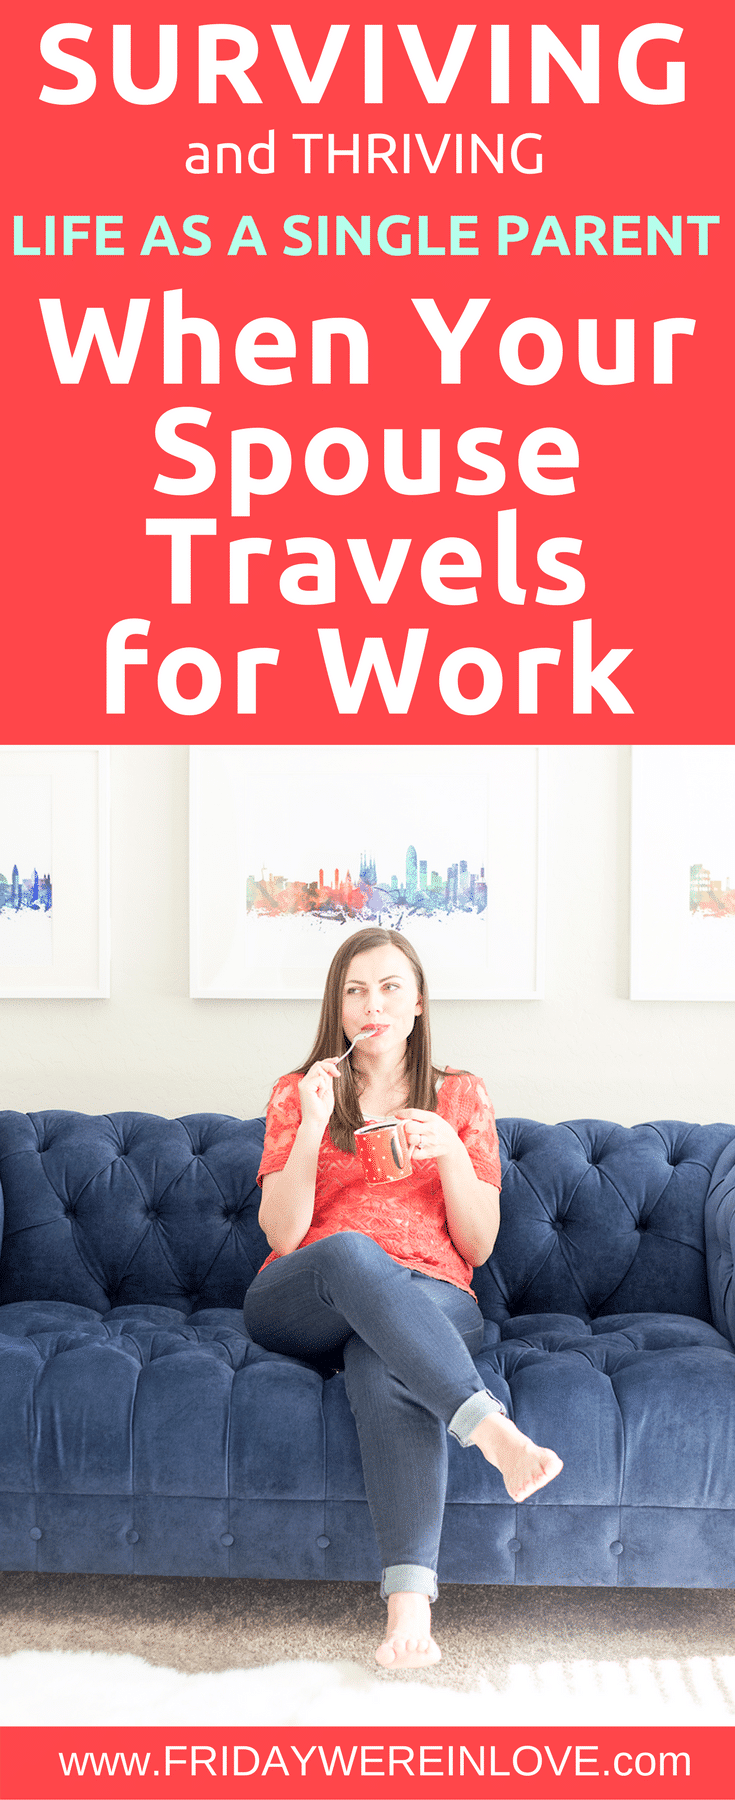 When Your Spouse Travels For Work: Surviving and Thriving Weeks as a Single Parent